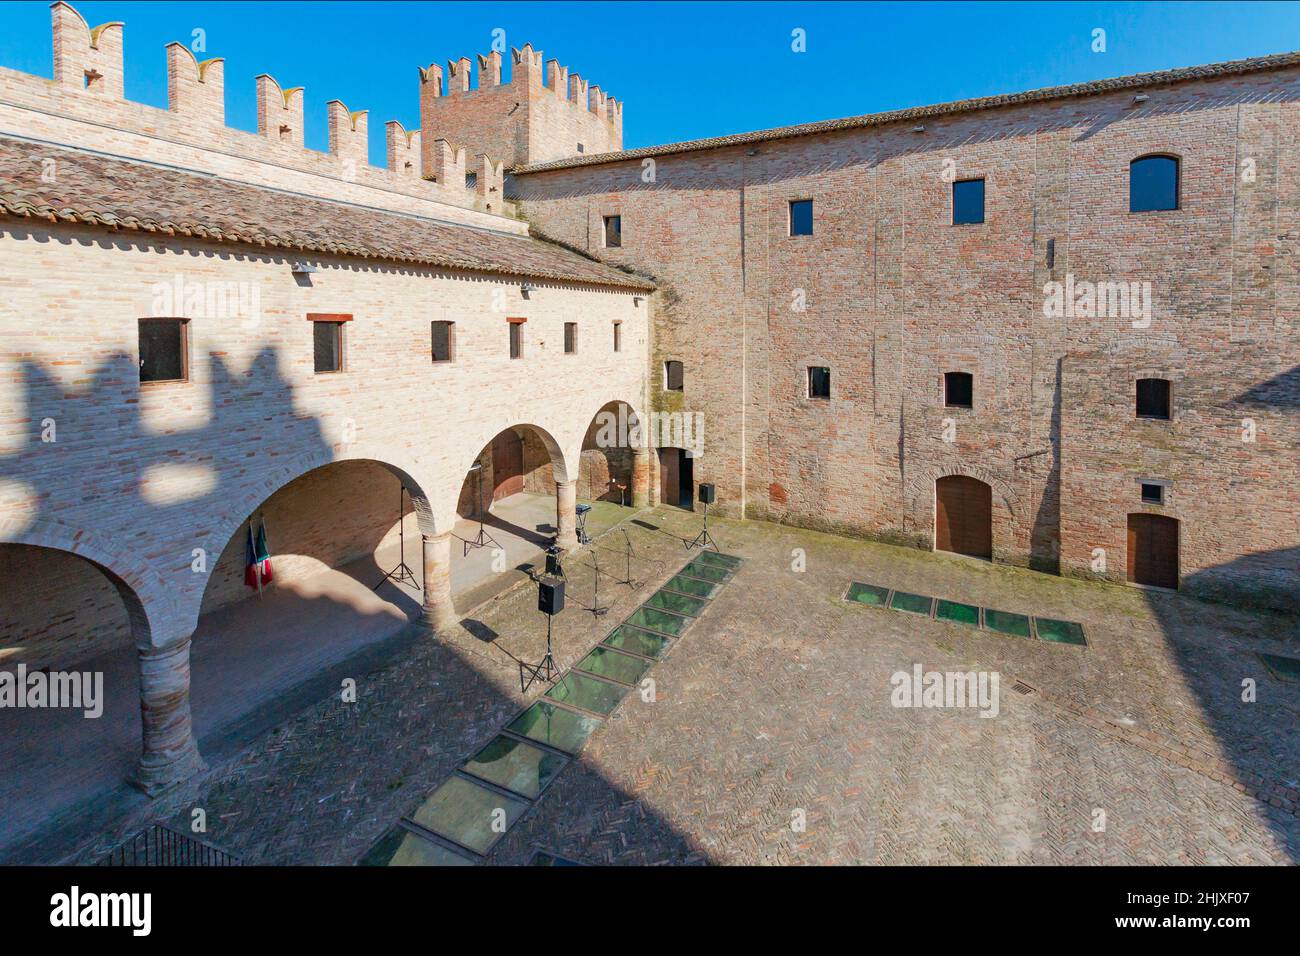 View of the Castle of the Rancia, Tolentino, Marche, Italy, Europe Stock Photo